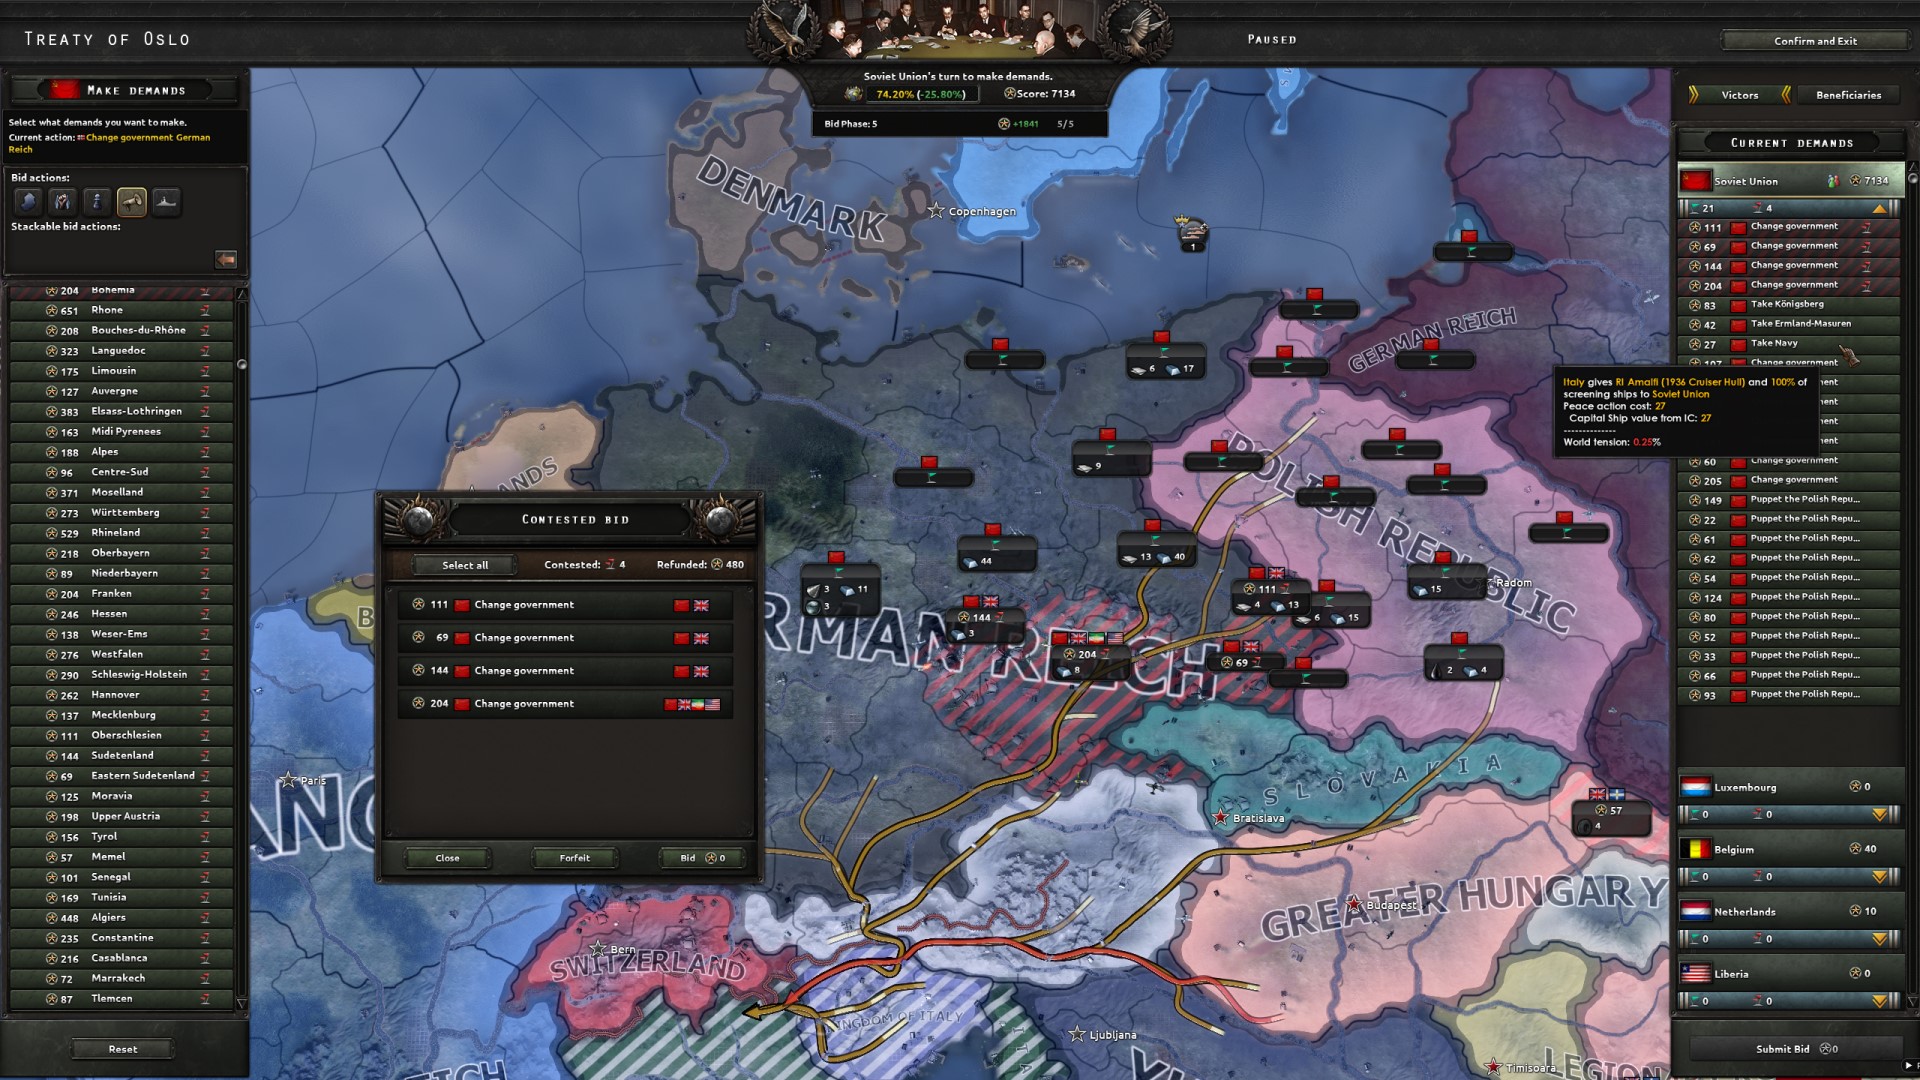 Hearts of Iron 4 mods - the map and screen of HOI4